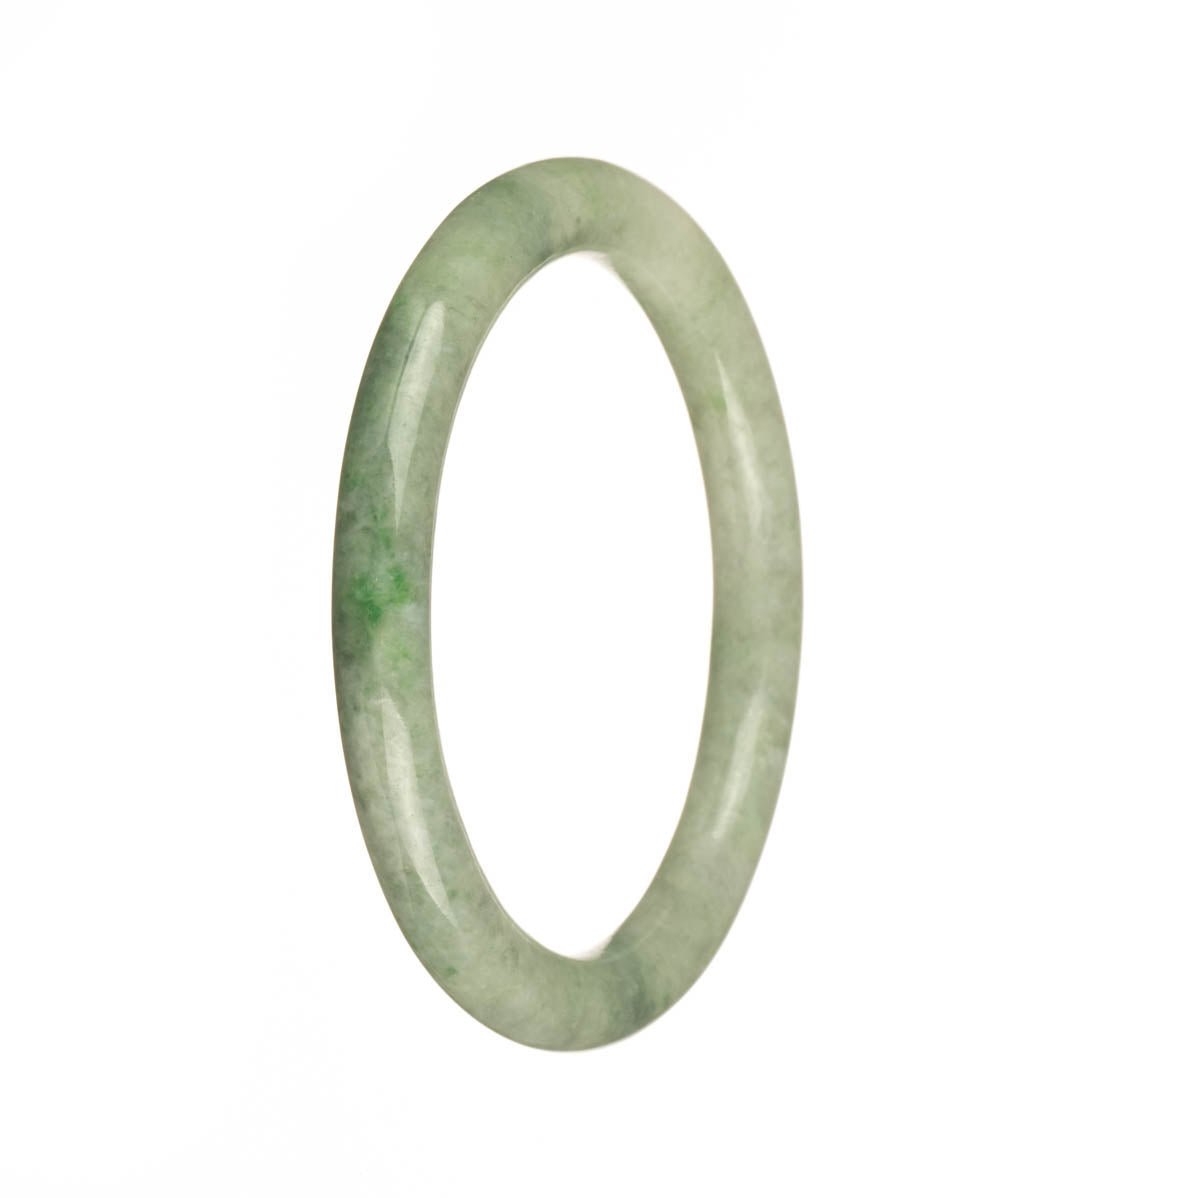 Real Grade A Green with Apple Green Spots Jadeite Bangle - 56mm Petite Round